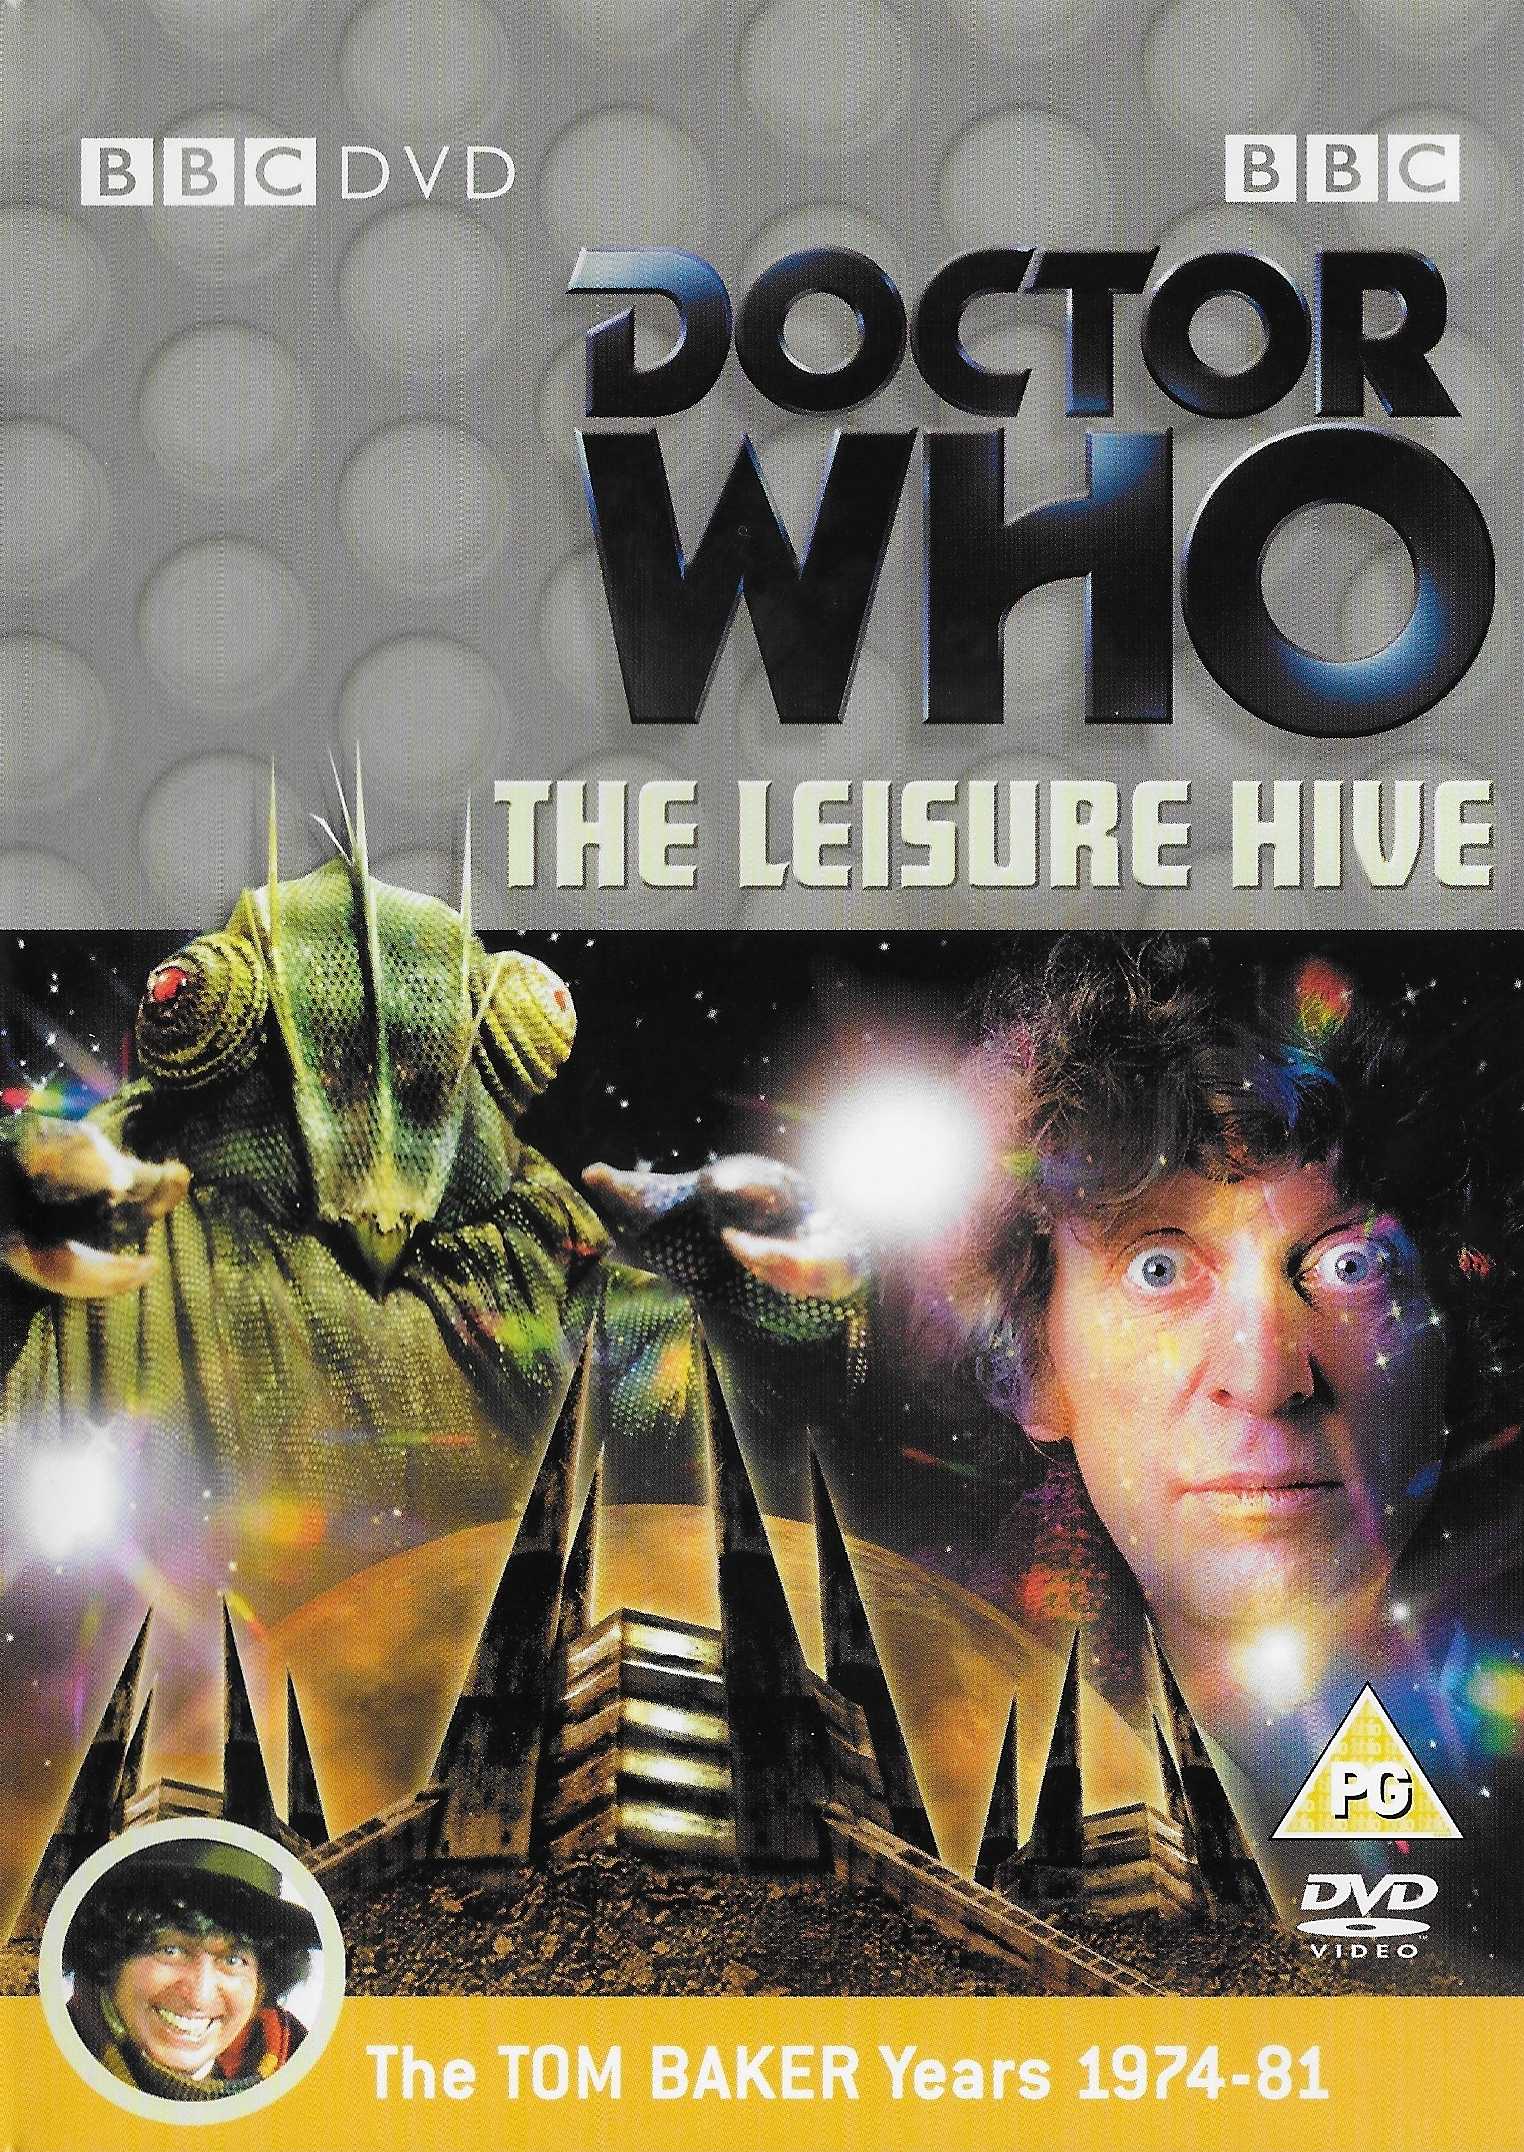 Picture of BBCDVD 1351 Doctor Who - The leisure hive by artist David Fisher from the BBC dvds - Records and Tapes library